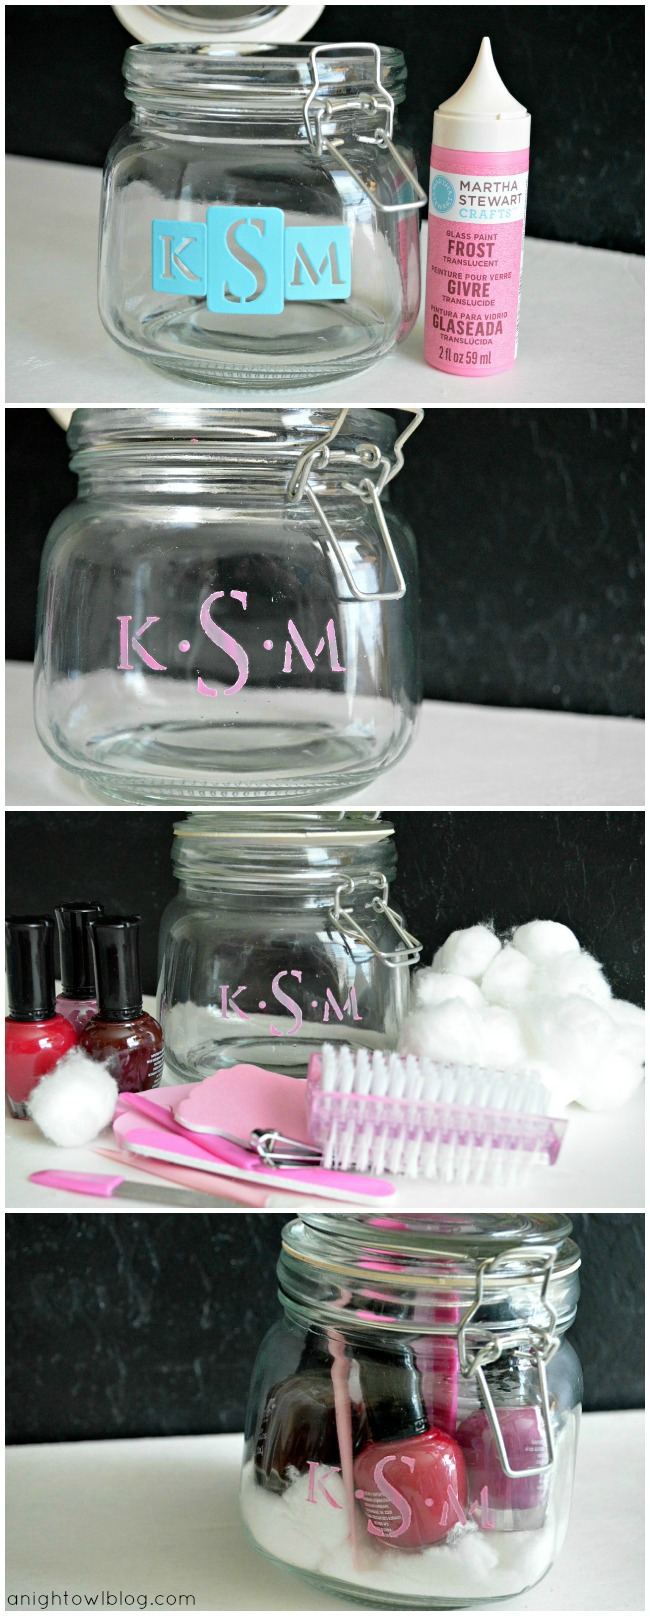 How to make a monogram jar for manicure supplies. What a fun gift idea!